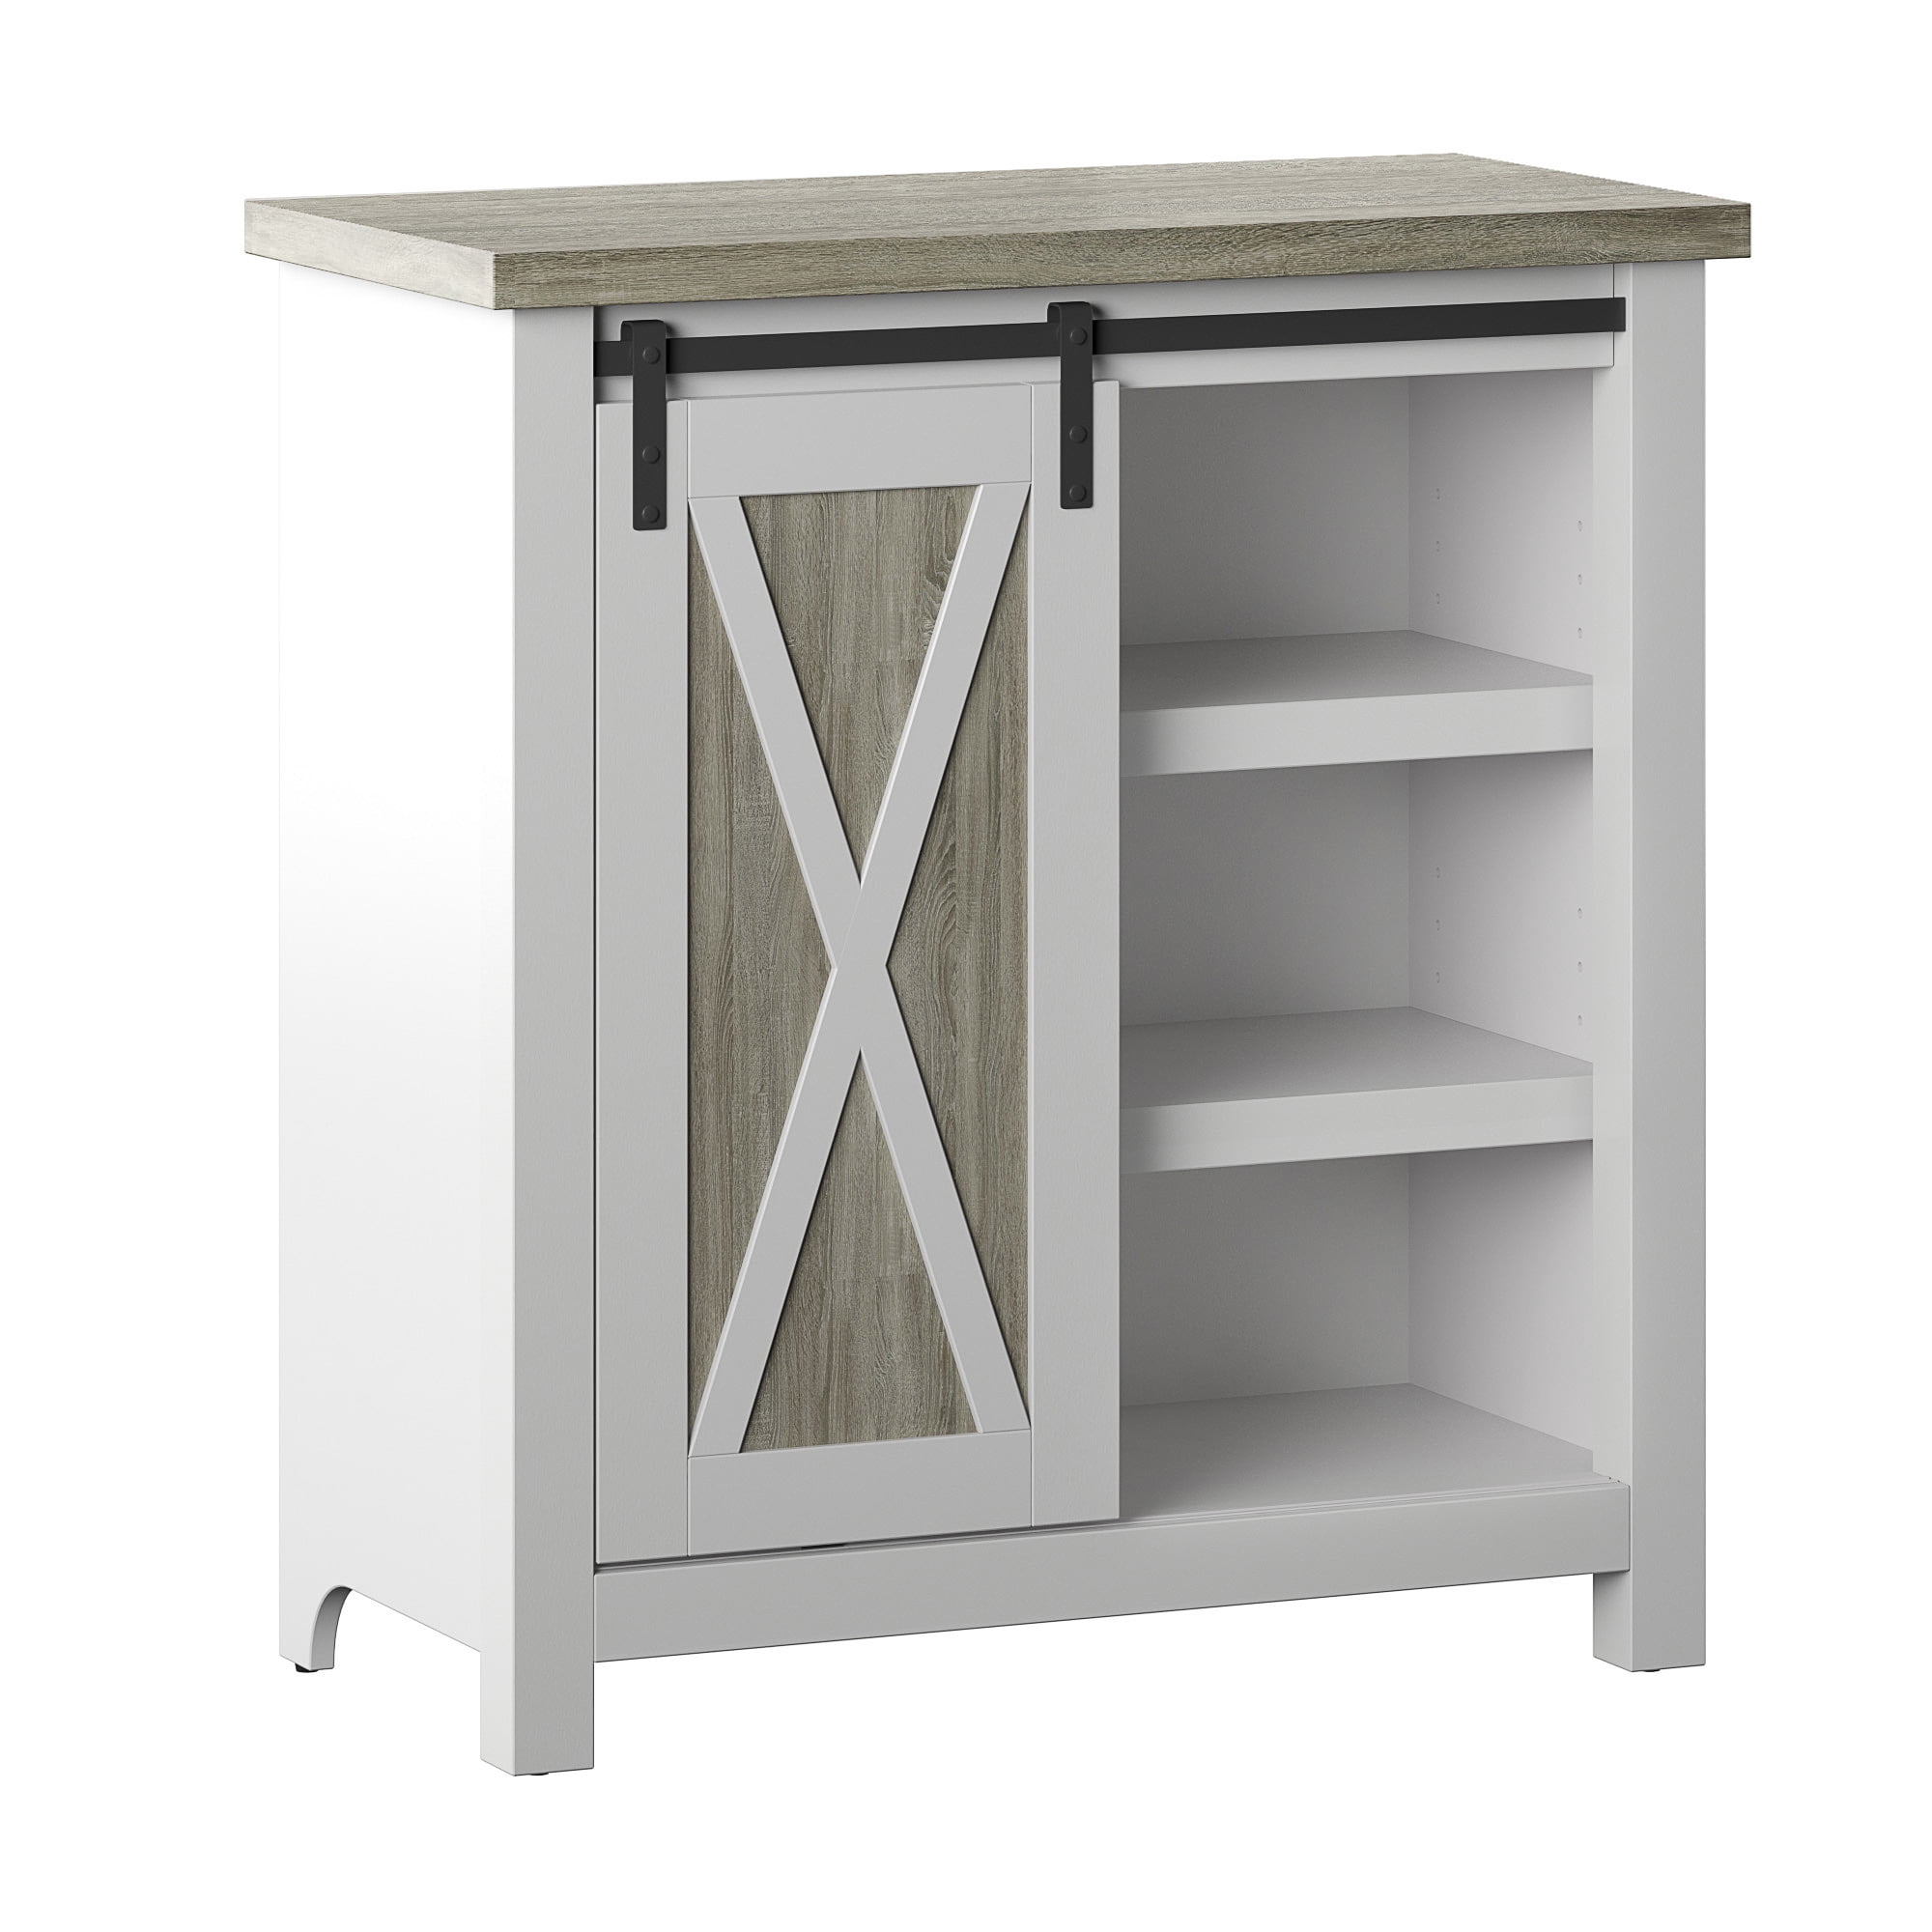 Two Tone Accent Cabinet with Sliding Barn Door and Adjustable Shelving in White